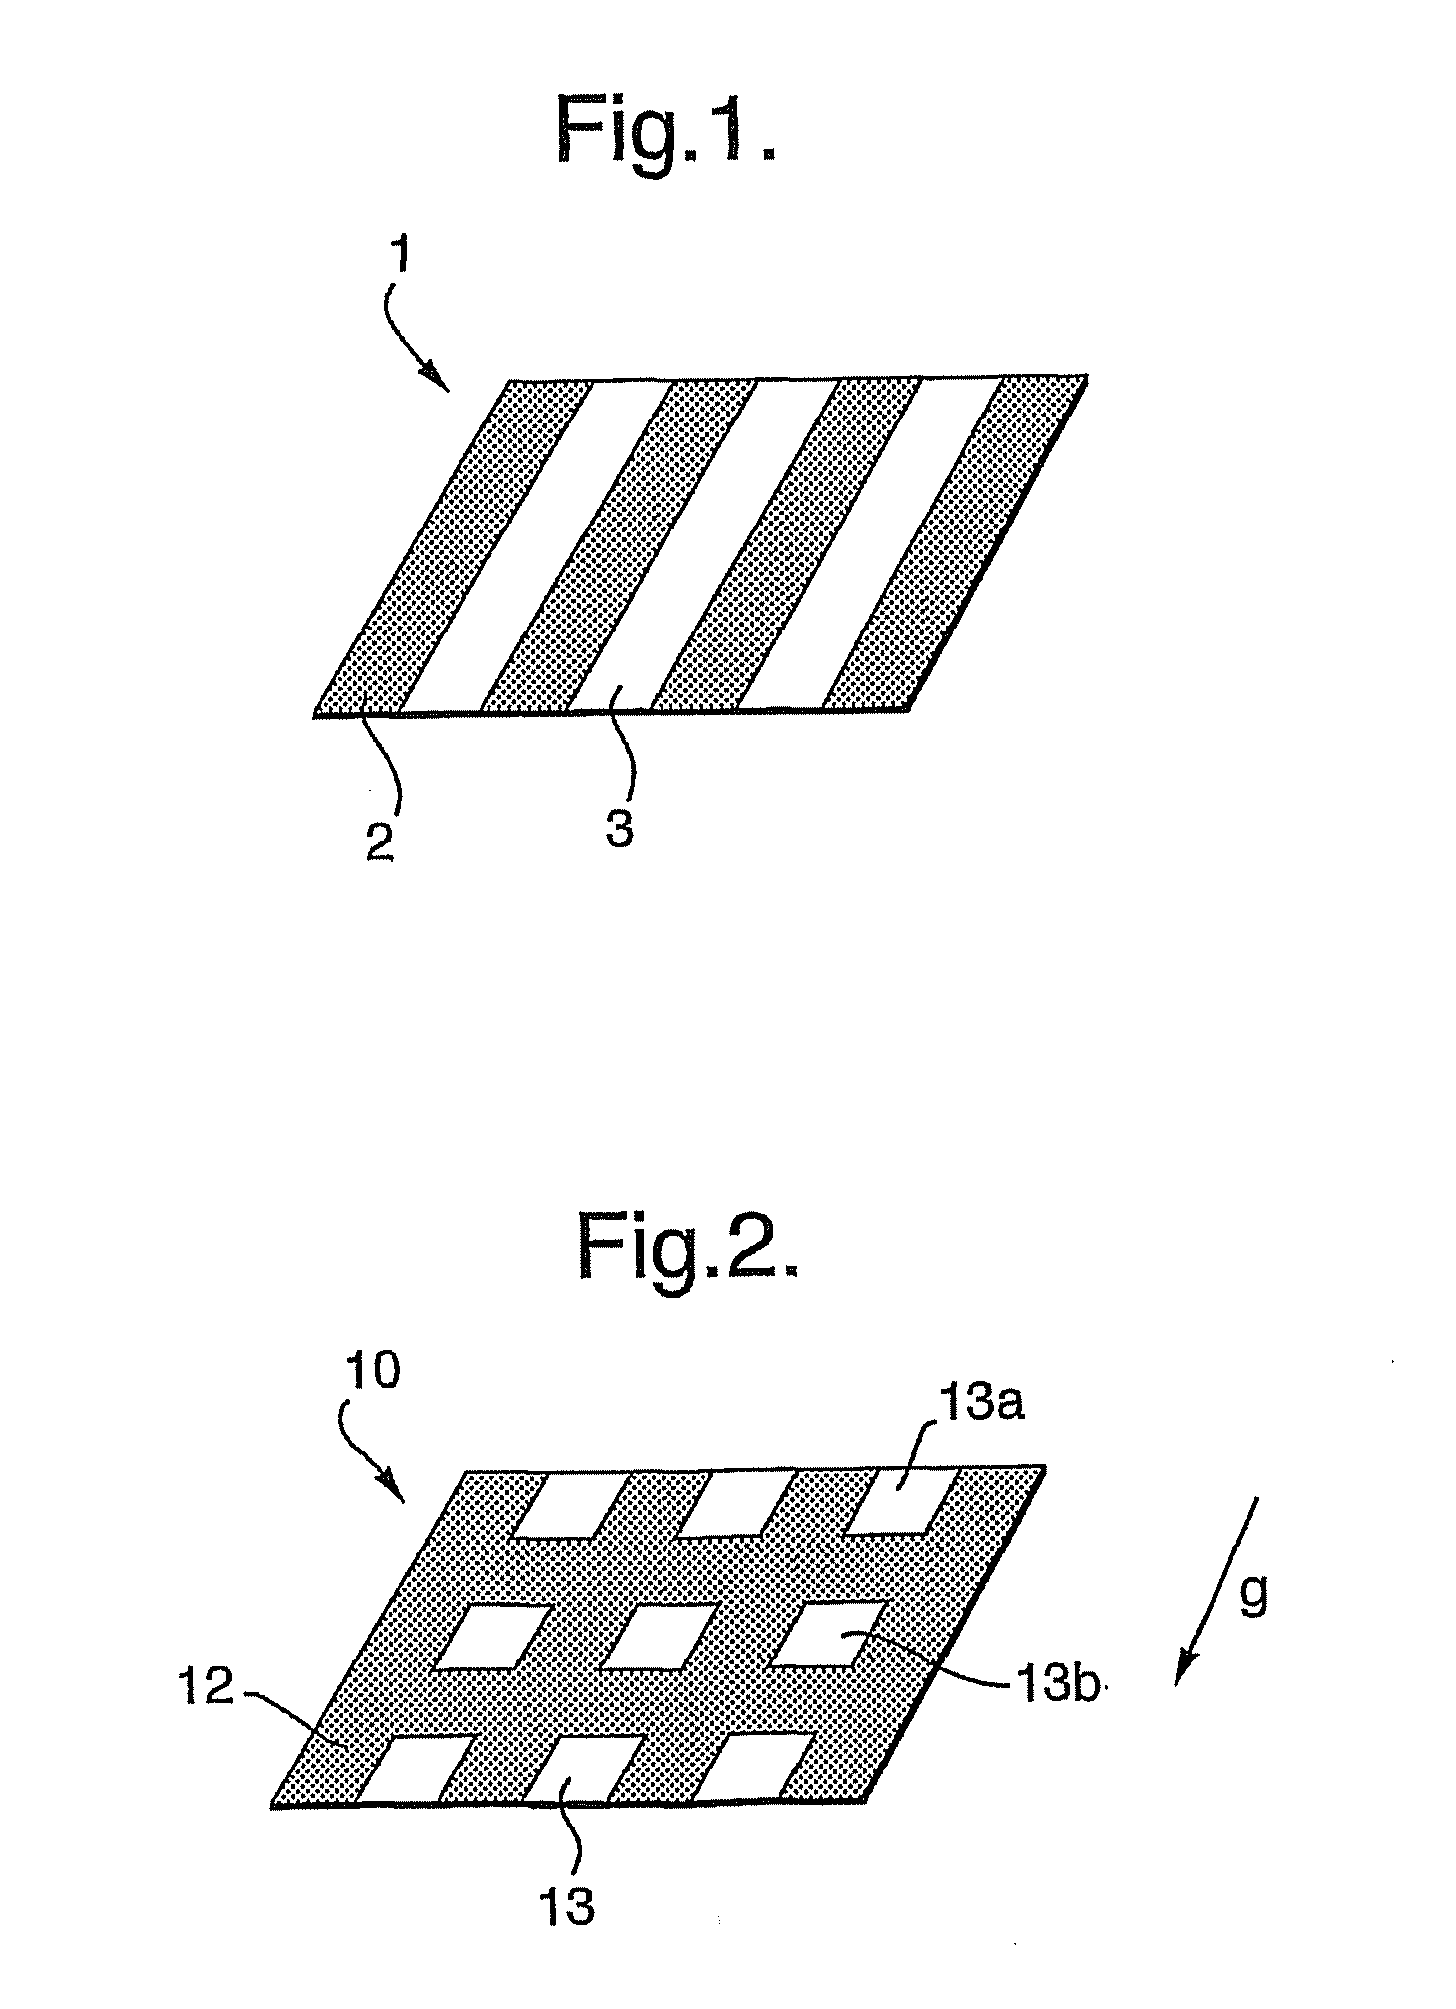 Surface for promoting droplet formation